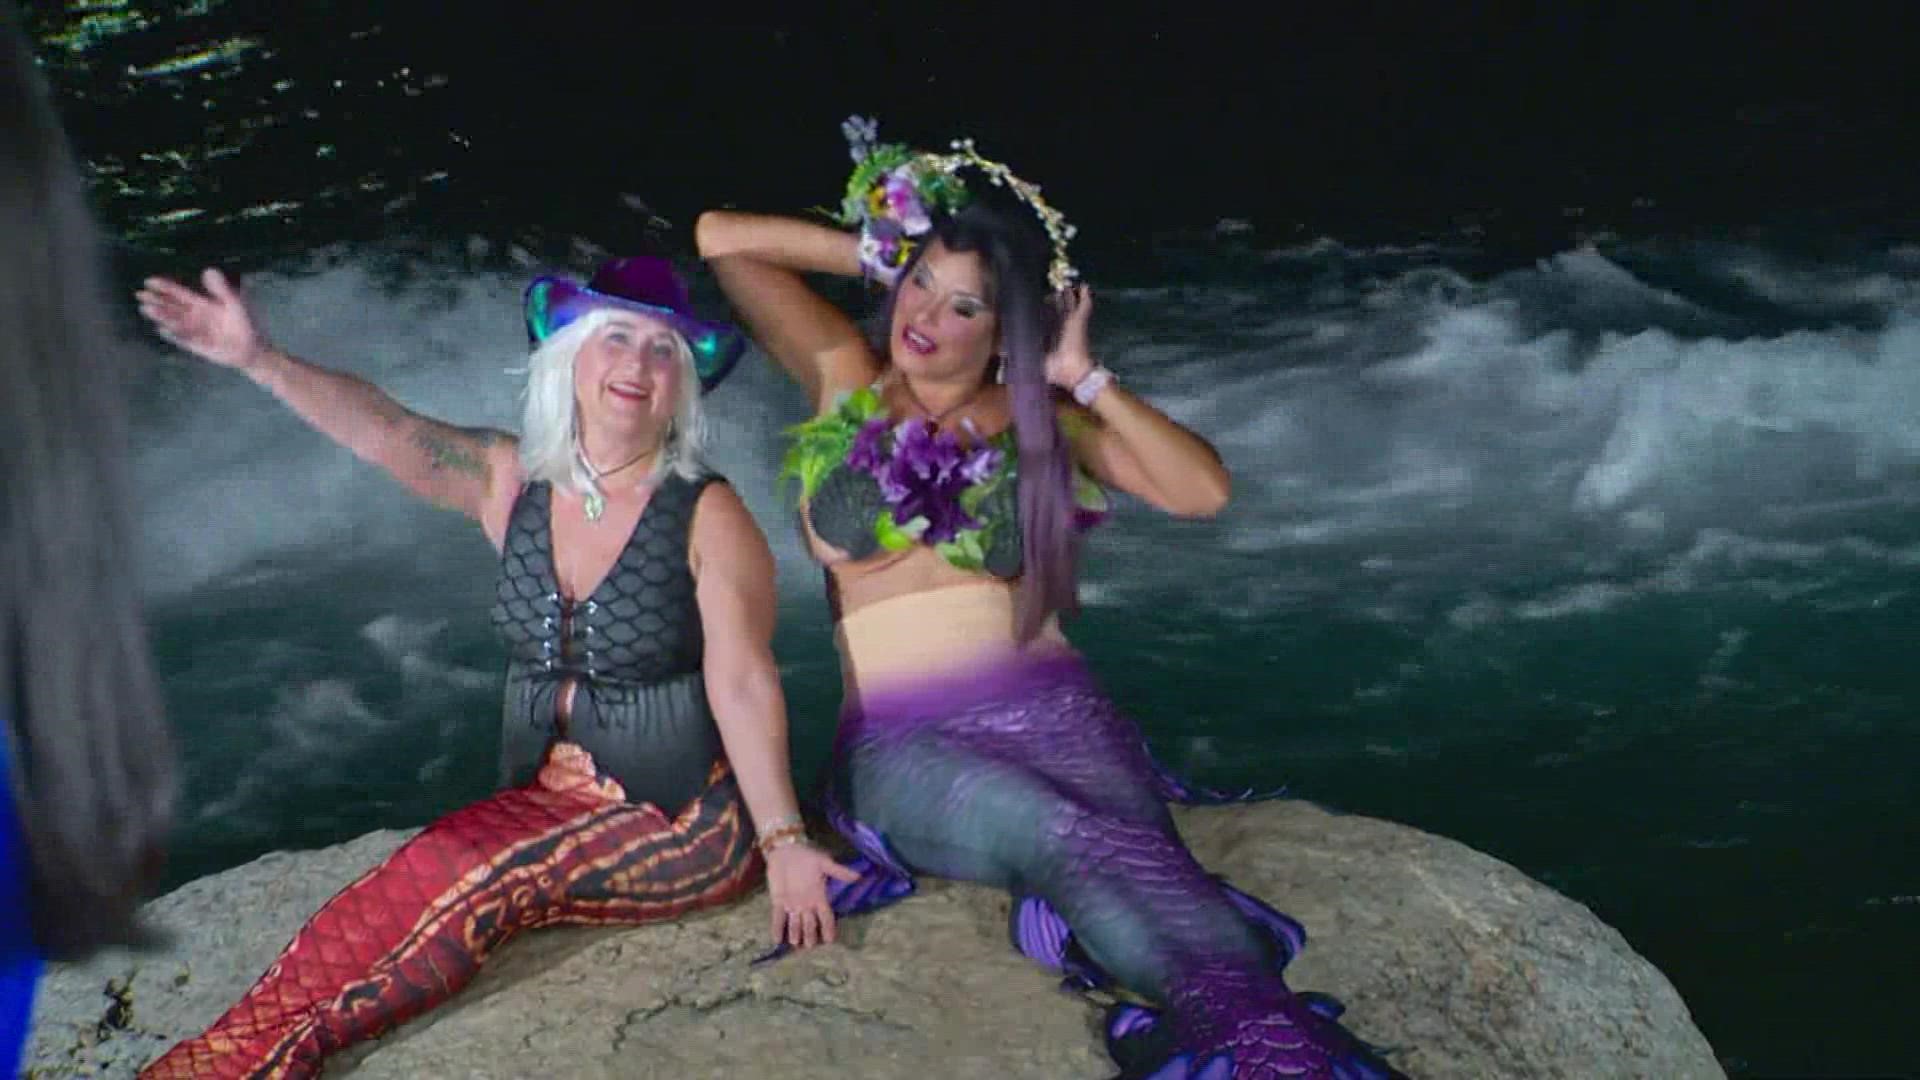 The "Mermaid Capital of Texas Fest" is underway in San Marcos! KVUE's Natalie Haddad has more on what attendees can expect.